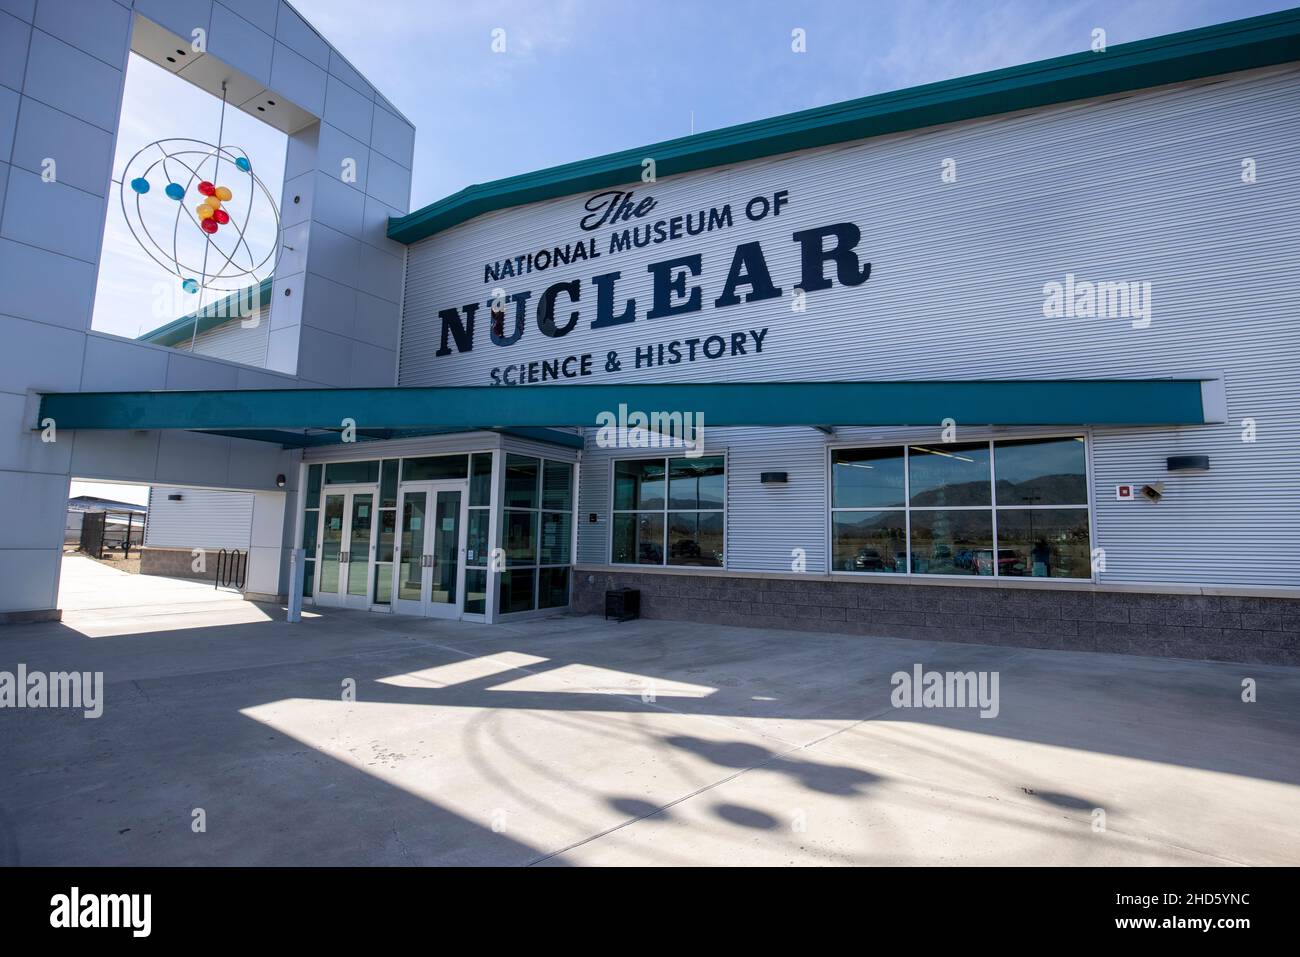 National Museum of Nuclear Science & History in Albuquerque, New Mexico. formerly named National Atomic Museum. Stock Photo